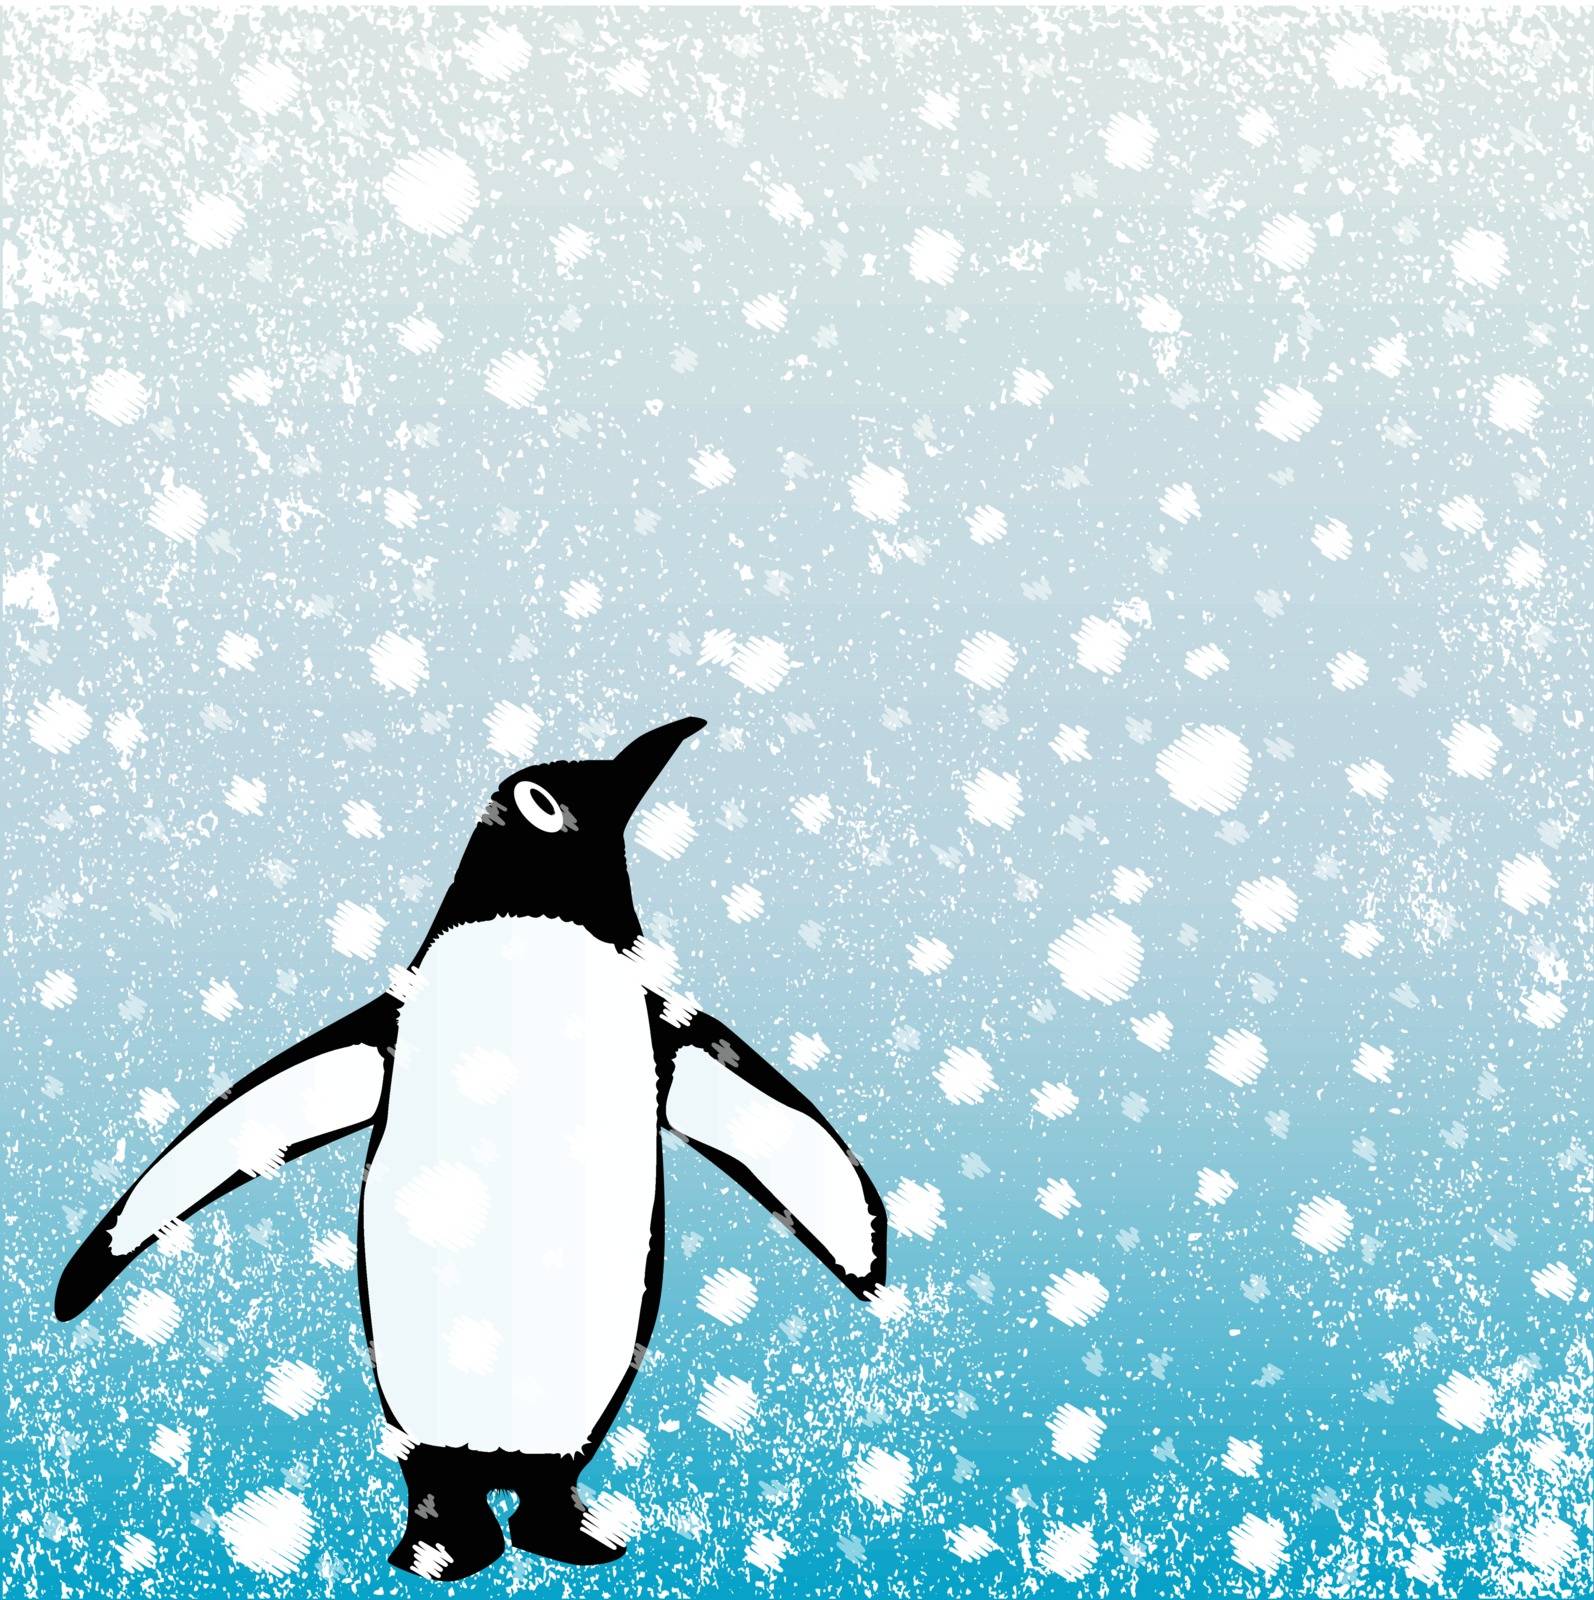 A snow blizzard background with a curious penguin